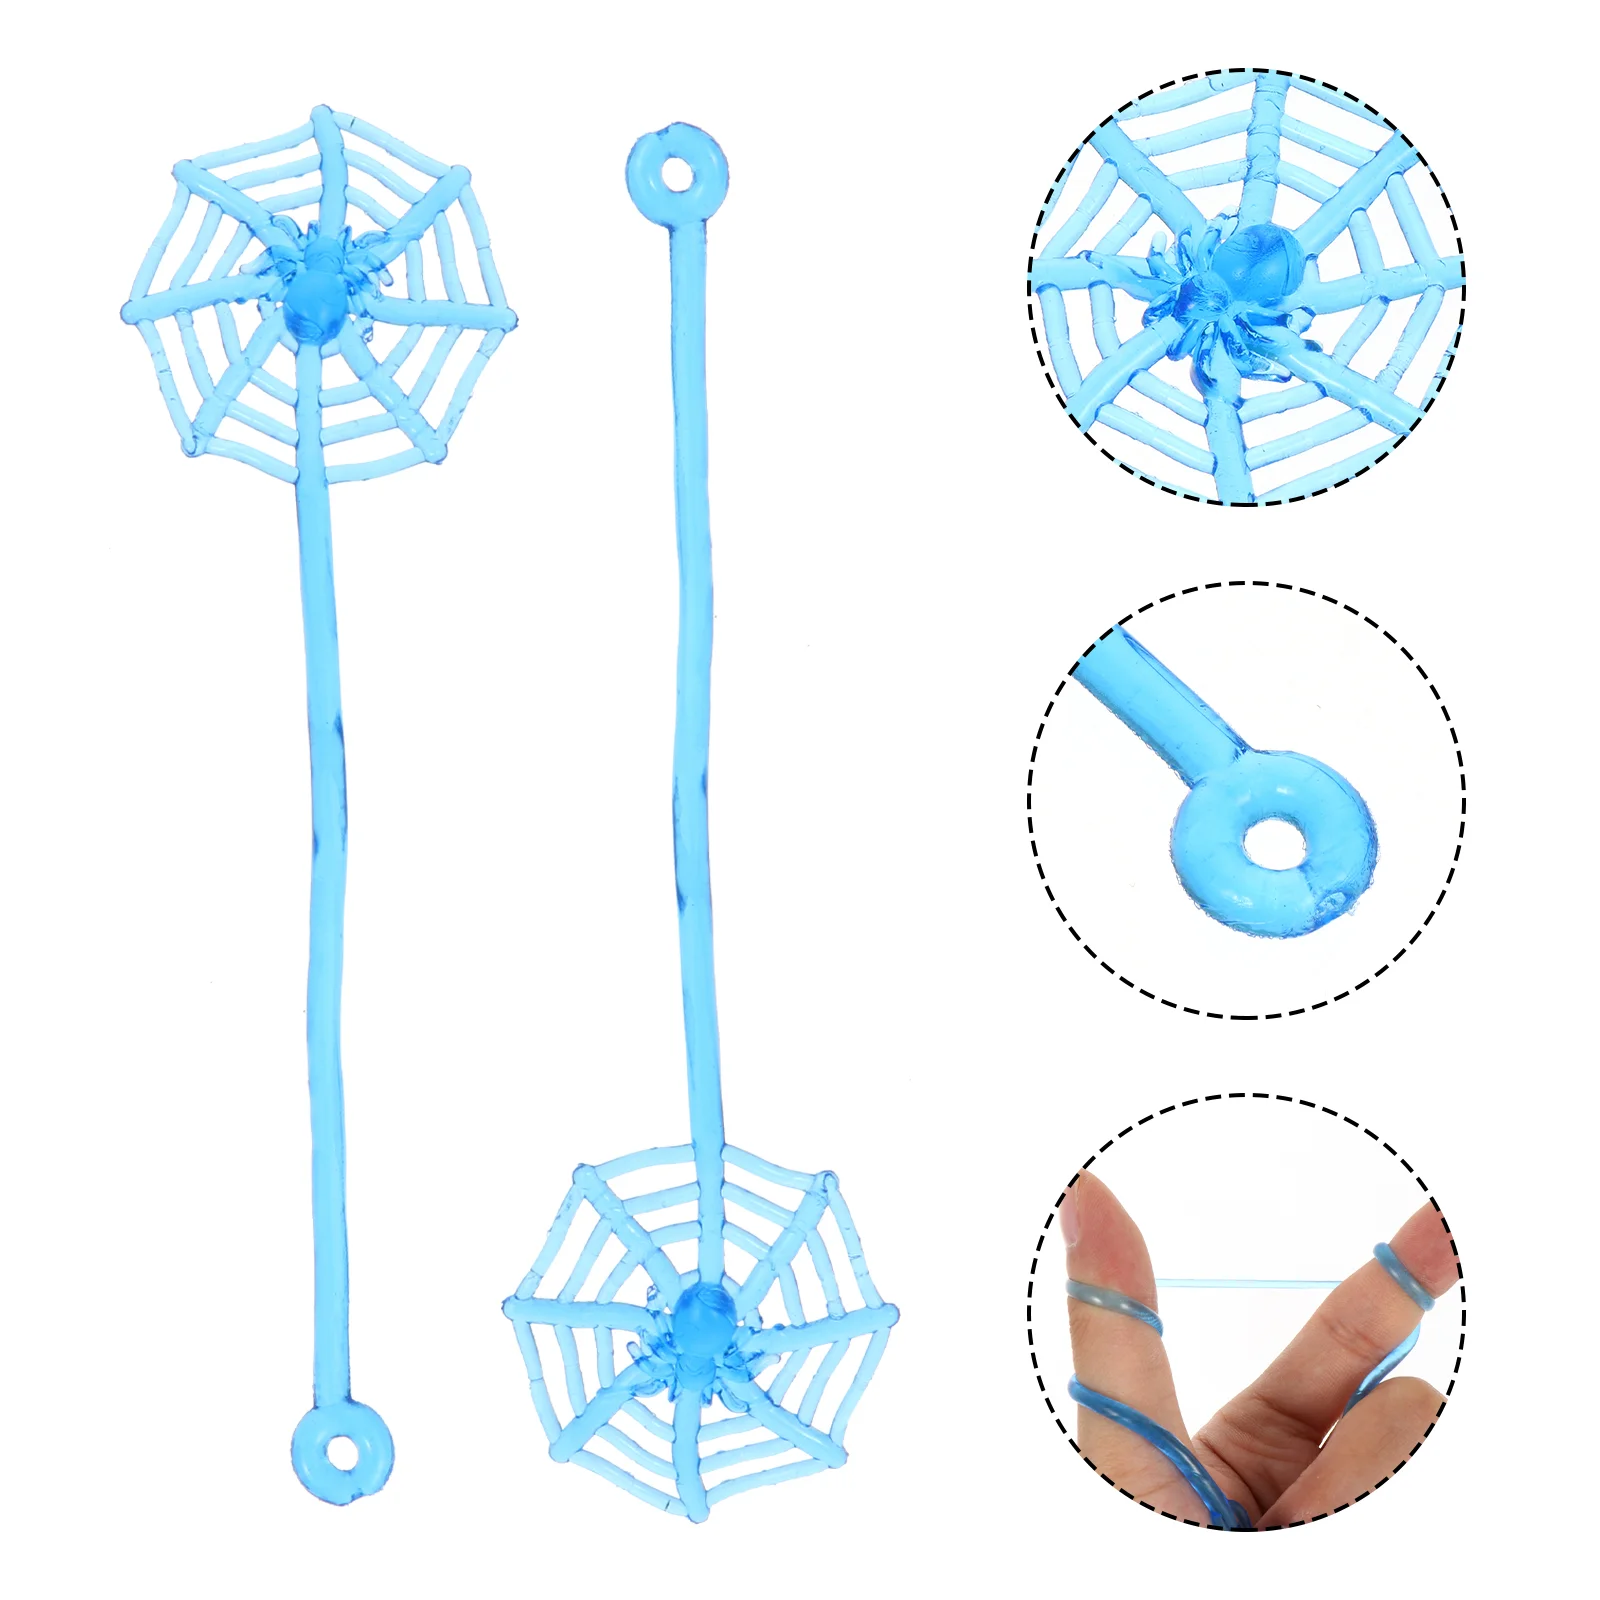 

20 Pcs Viscous Spider Web Festival Party Toys Sticky Hands Mini Kids Extendable Halloween Gifts Playthings